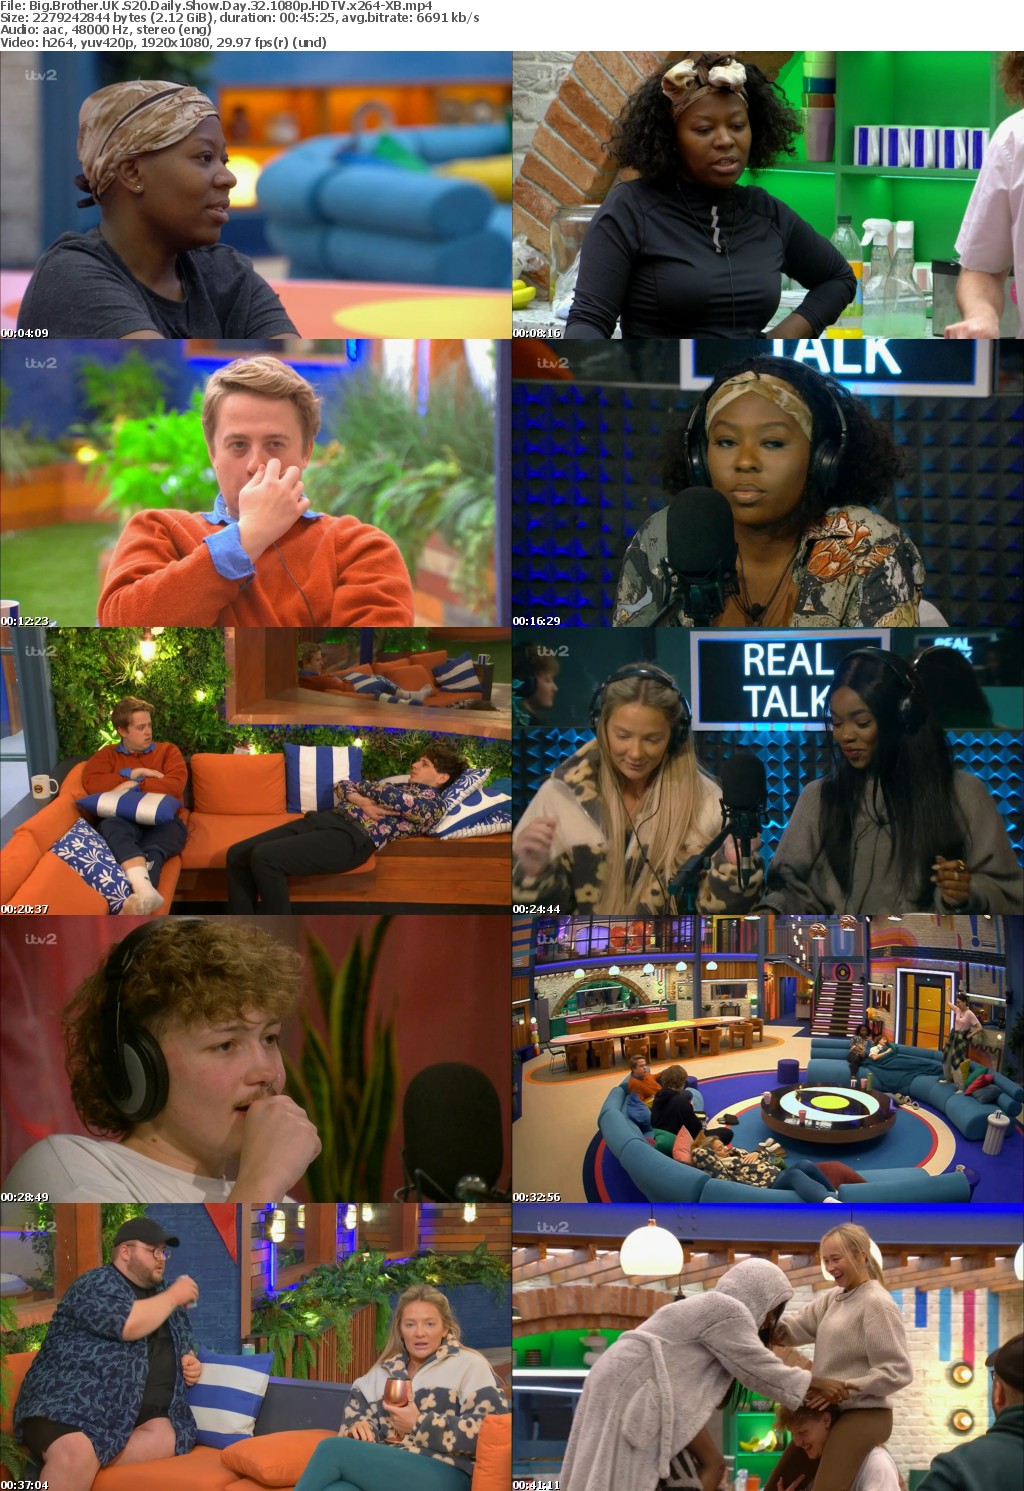 Big Brother UK S20 Daily Show Day 32 1080p HDTV x264-XB